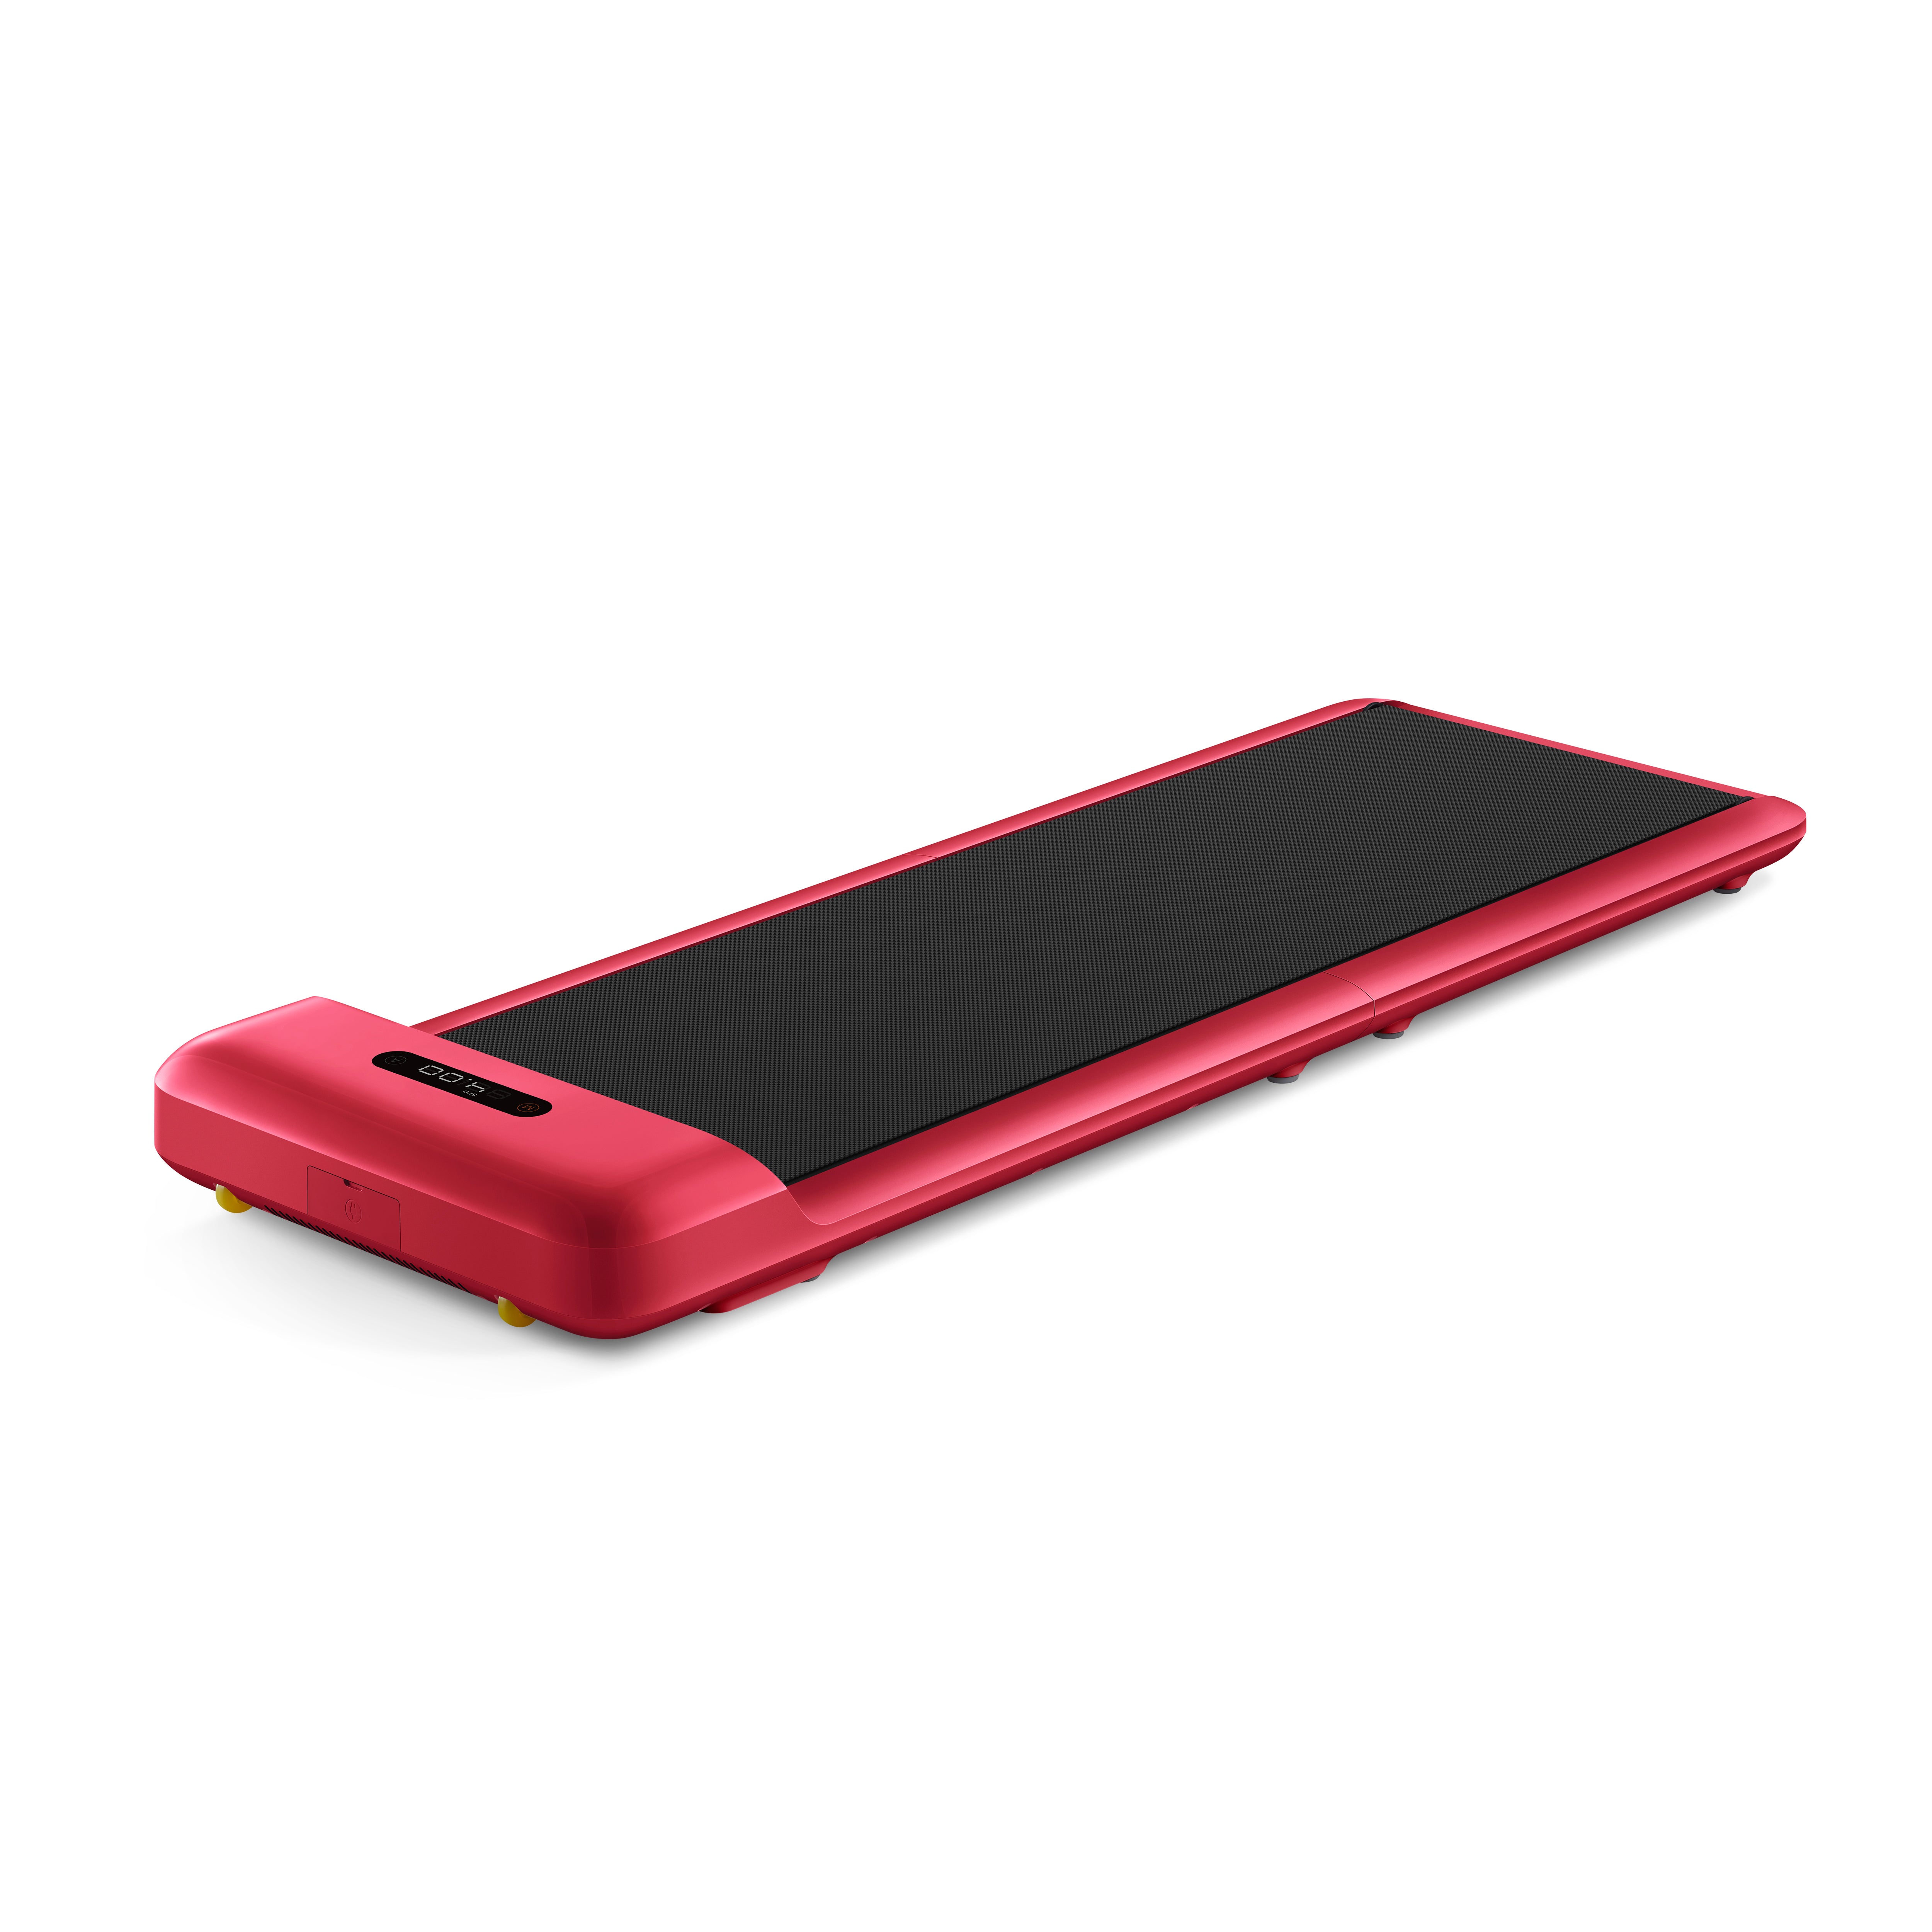 King Smith Smart Foldable Walking Pad C2 With - Red